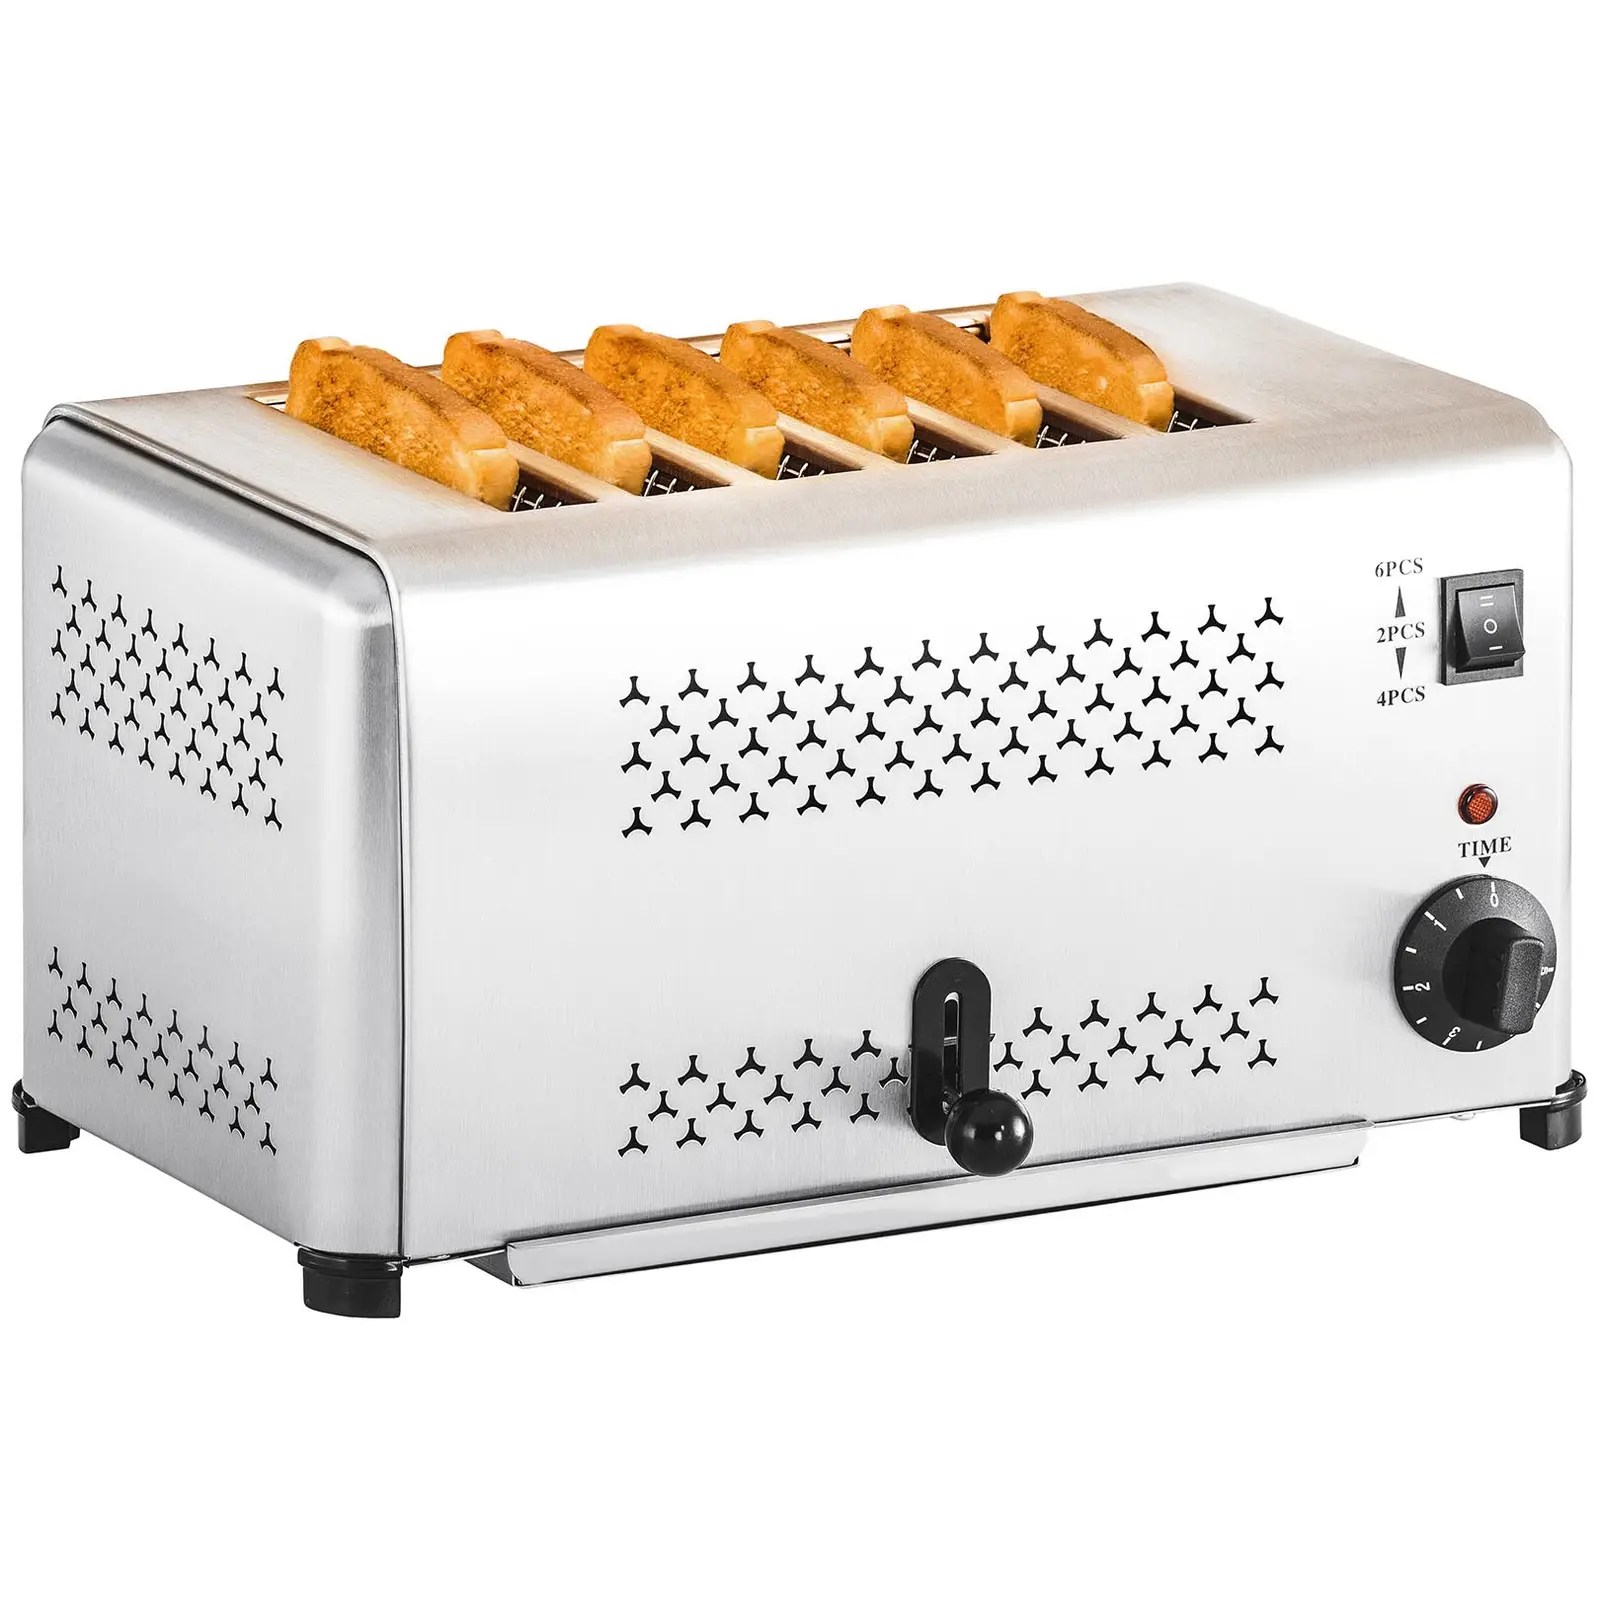 Catering toaster